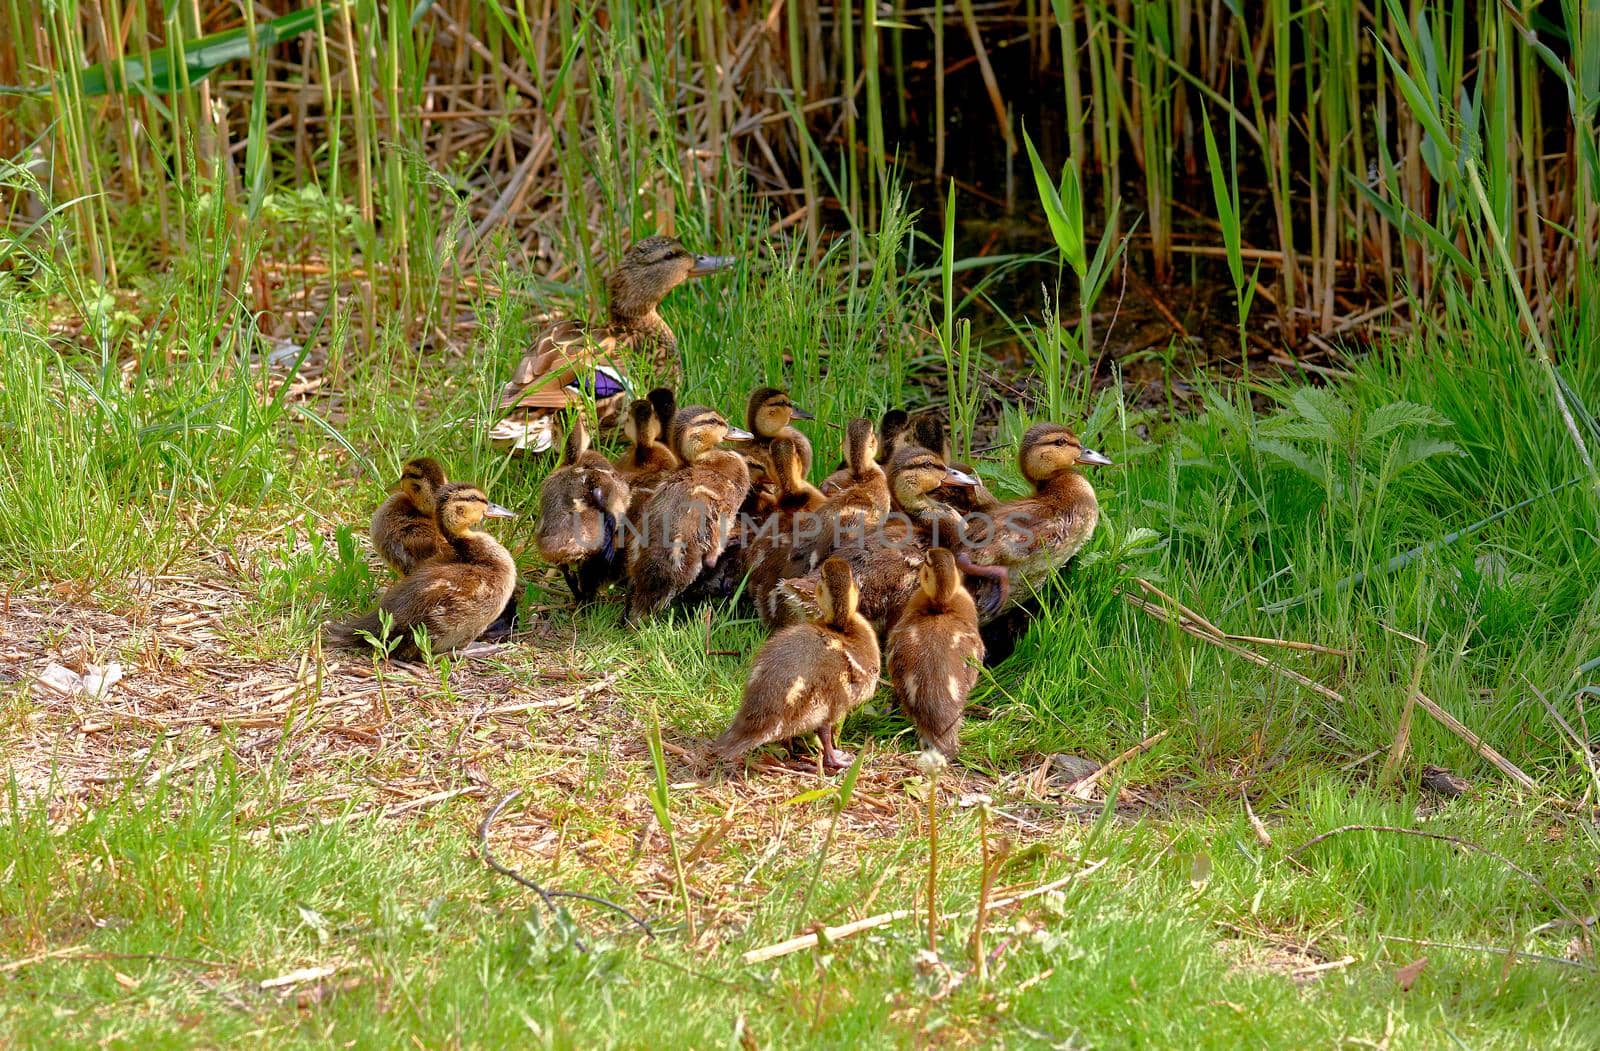 a waterbird with a broad blunt bill, short legs, webbed feet, and a waddling gait. Mom wild brown duck leads her baby ducklings to the water in the reeds.